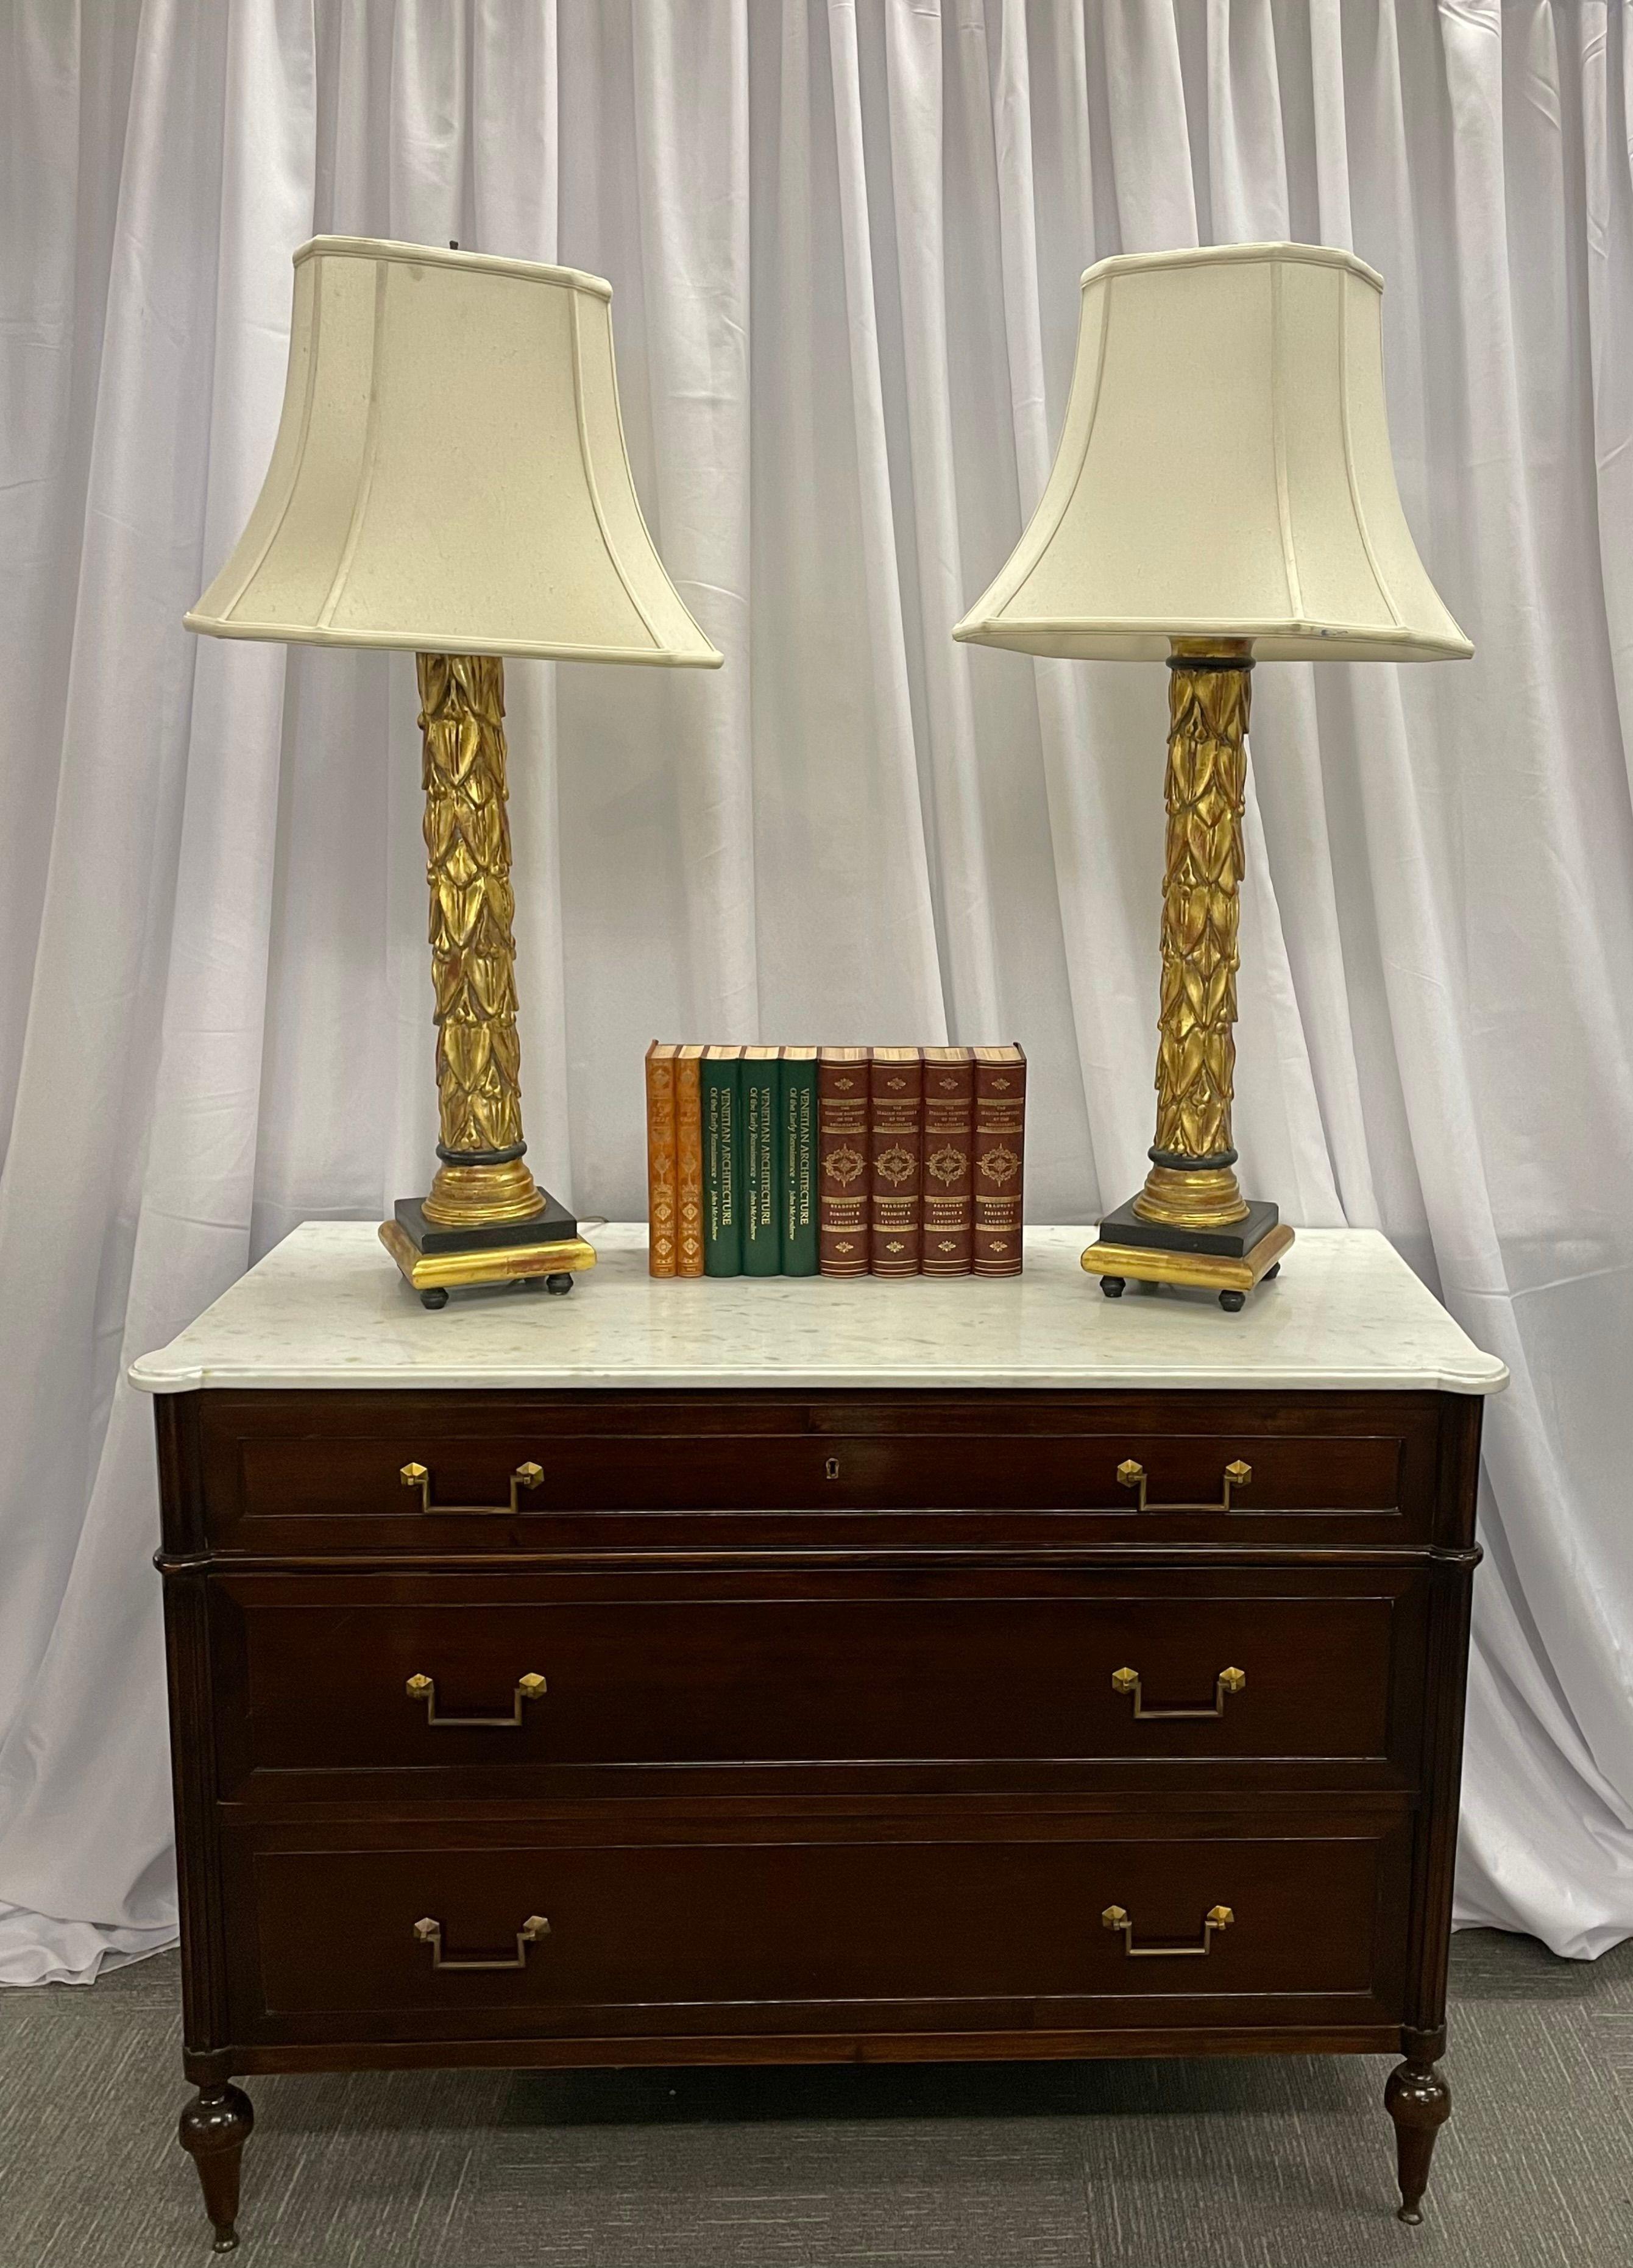 Maison Jansen Table Lamps, Fleur de Lis, Mid-Century Modern, France, 1950s In Good Condition For Sale In Stamford, CT